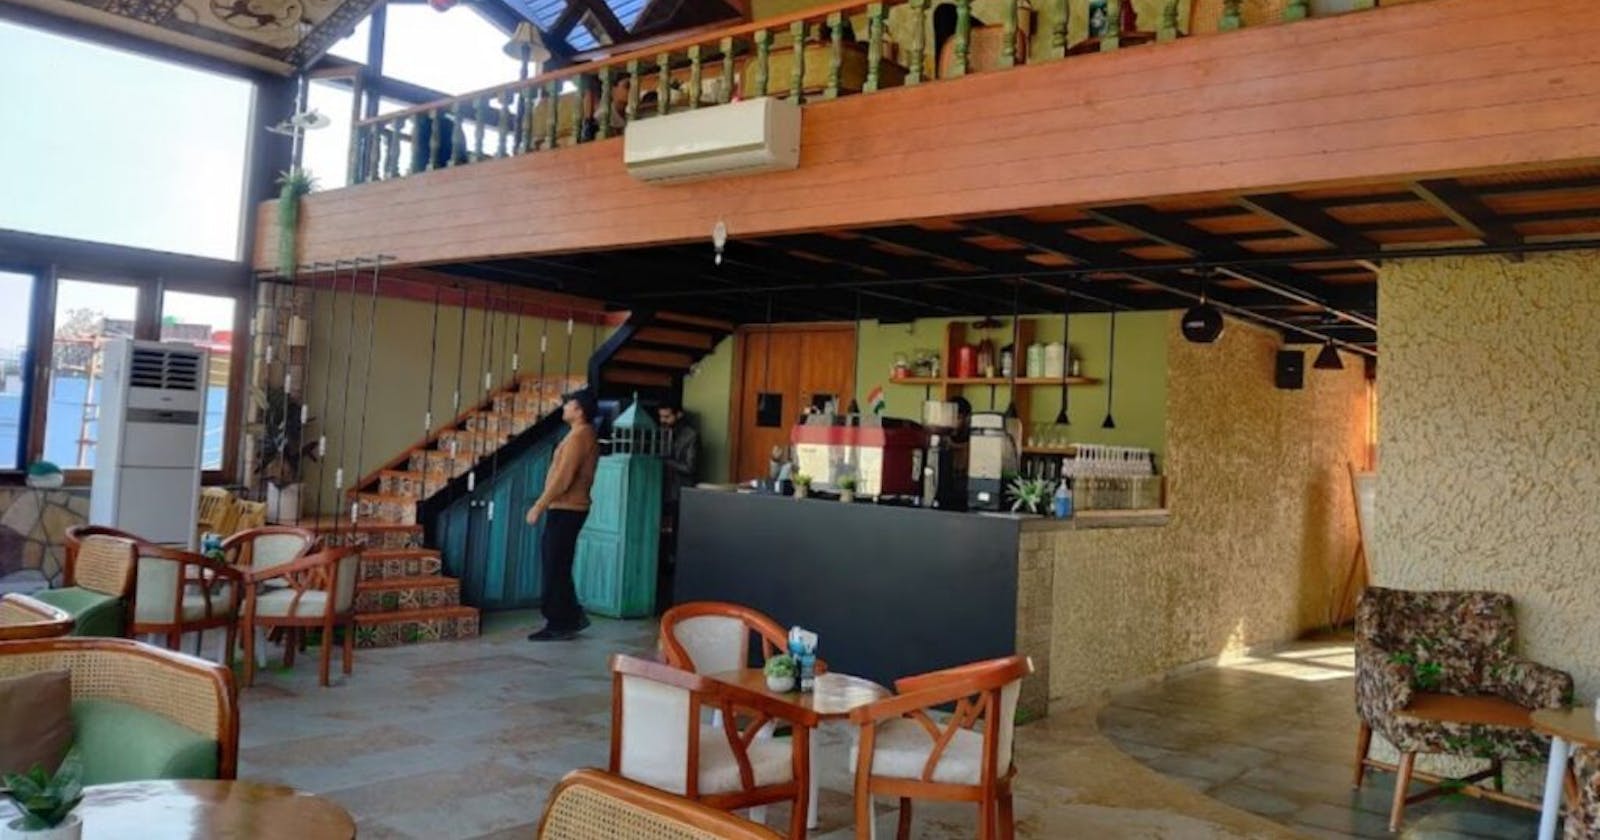 Narcoz: The Best Cafe for Couples in Dehradun